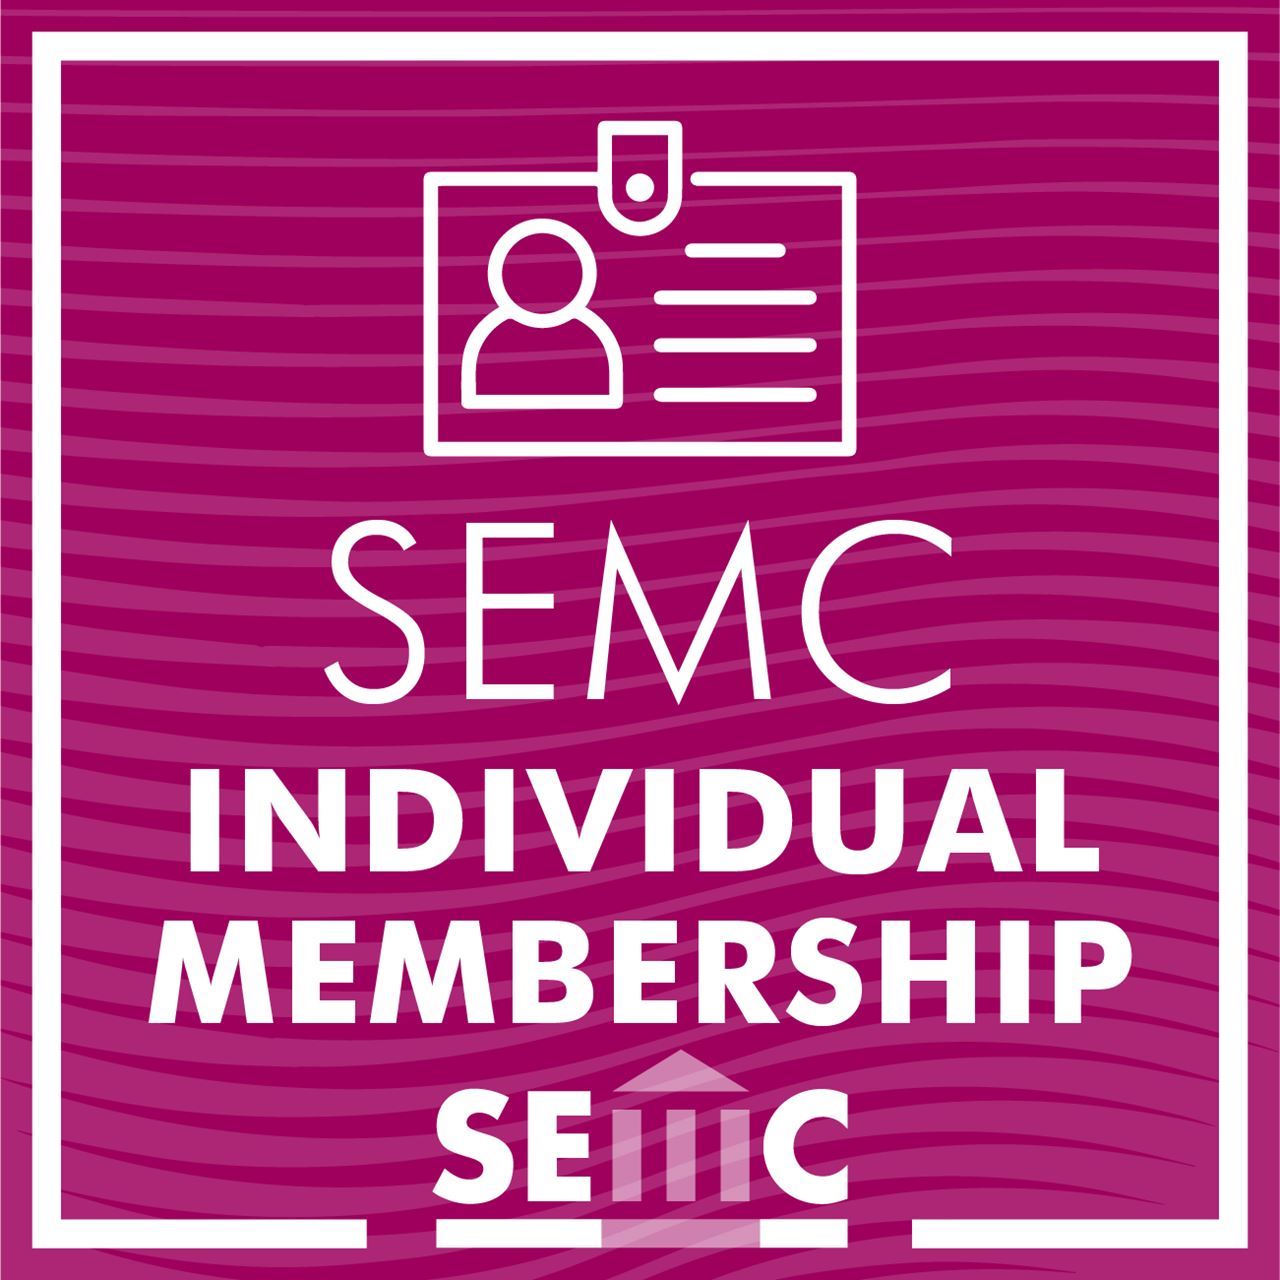 A dark pink striped background, with a badge and the words “SEMC Individual Membership” are centered. The SEMC logo is also at the bottom.